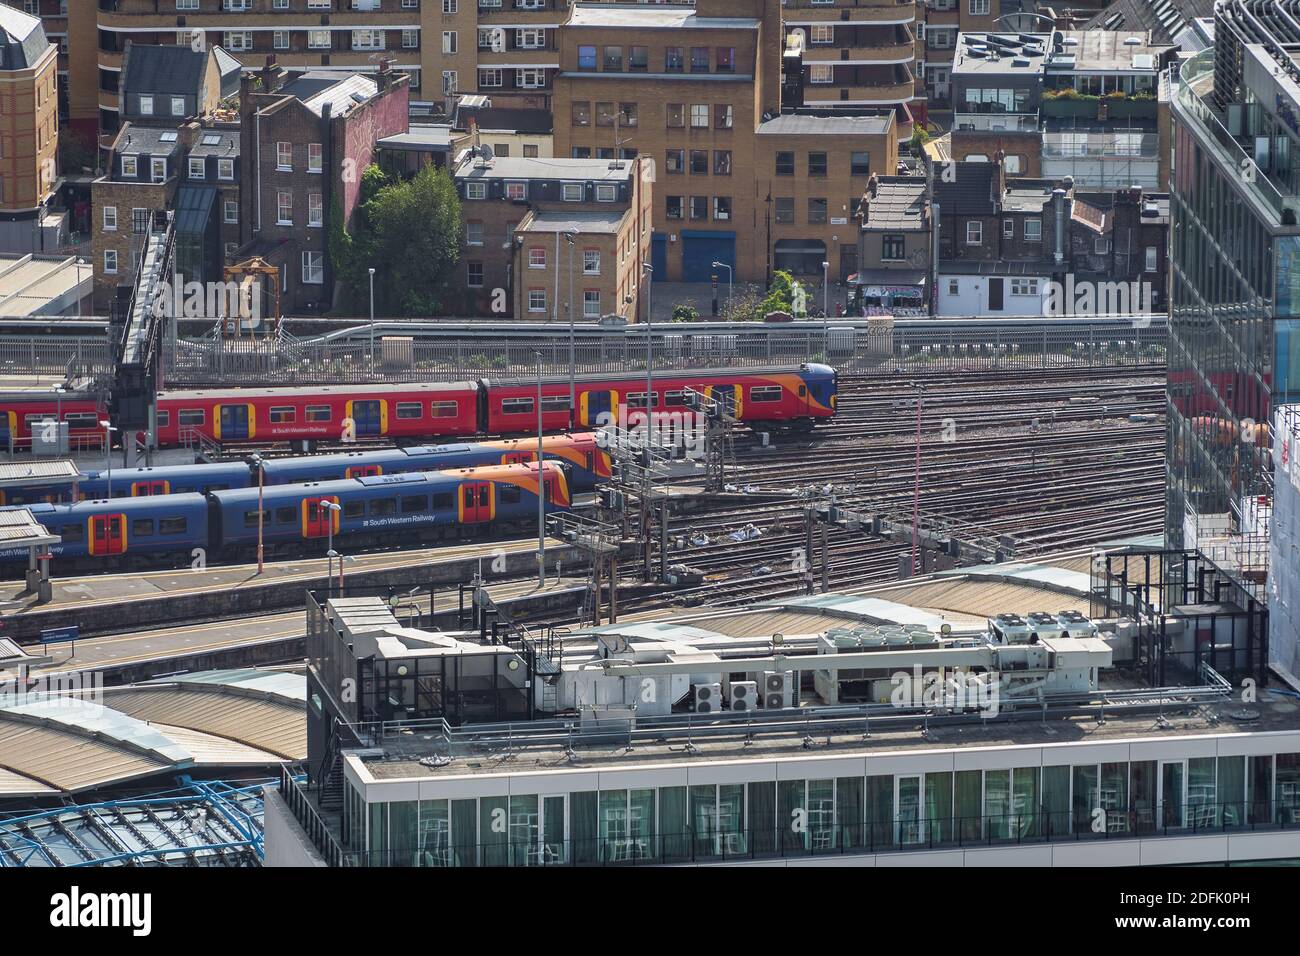 LONDON, UNITED KINGDOM - SEPTEMBER 28th 2020: Aerial view of Waterloo station in London which is served by South Western Railway Stock Photo